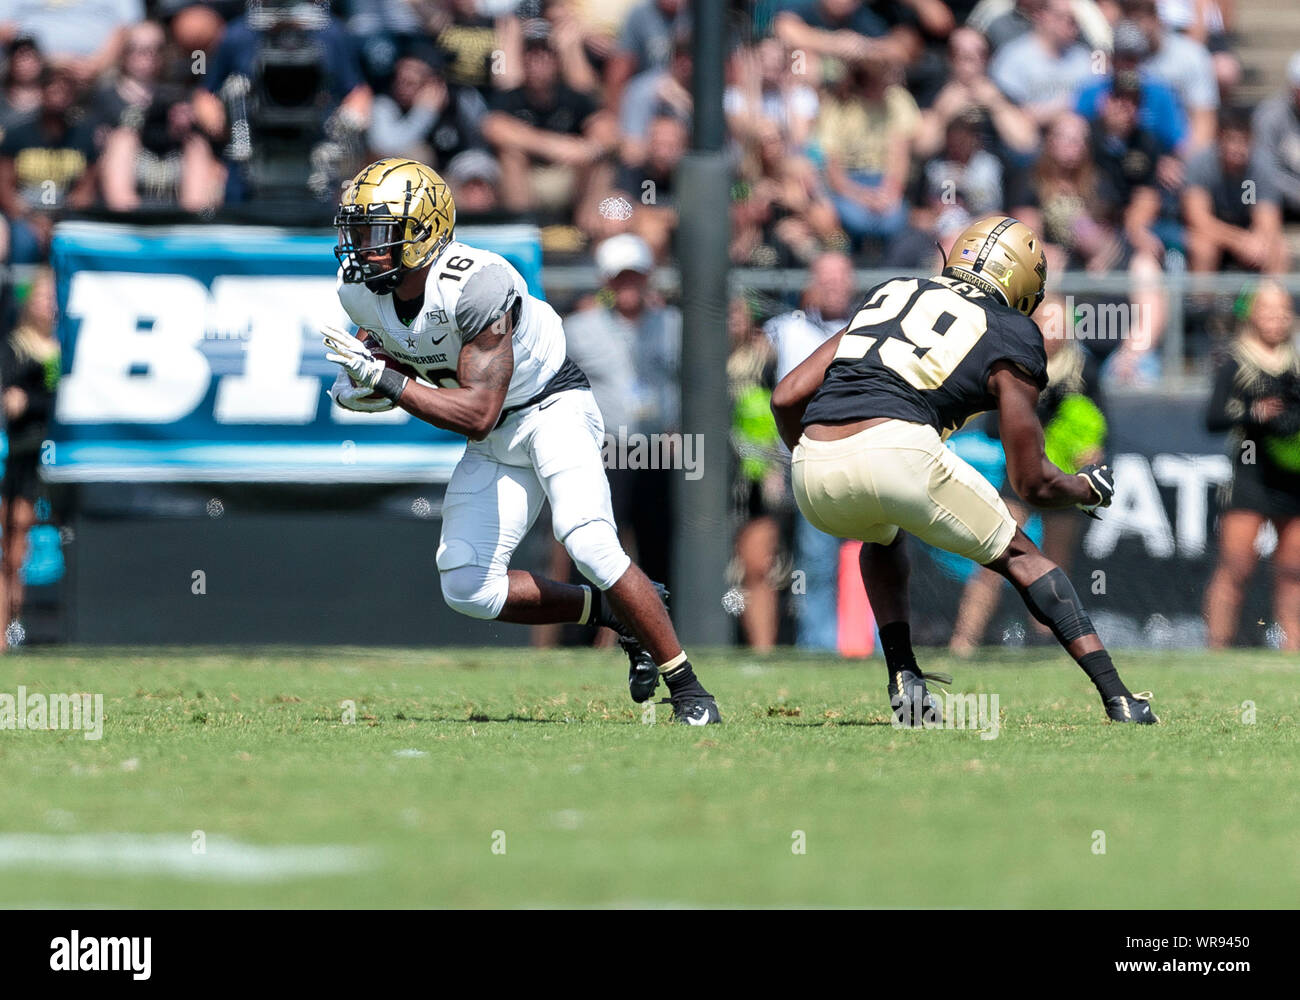 West Lafayette, Indiana, USA. 07th Sep, 2019. Vanderbilt wide receiver Kalija Lipscomb (16) runs with the ball as Purdue defensive back Simeon Smiley (29) pursues during NCAA football game action between the Vanderbilt Commodores and the Purdue Boilermakers at Ross-Ade Stadium in West Lafayette, Indiana. Purdue defeated Vanderbilt 42-24. John Mersits/CSM/Alamy Live News Stock Photo